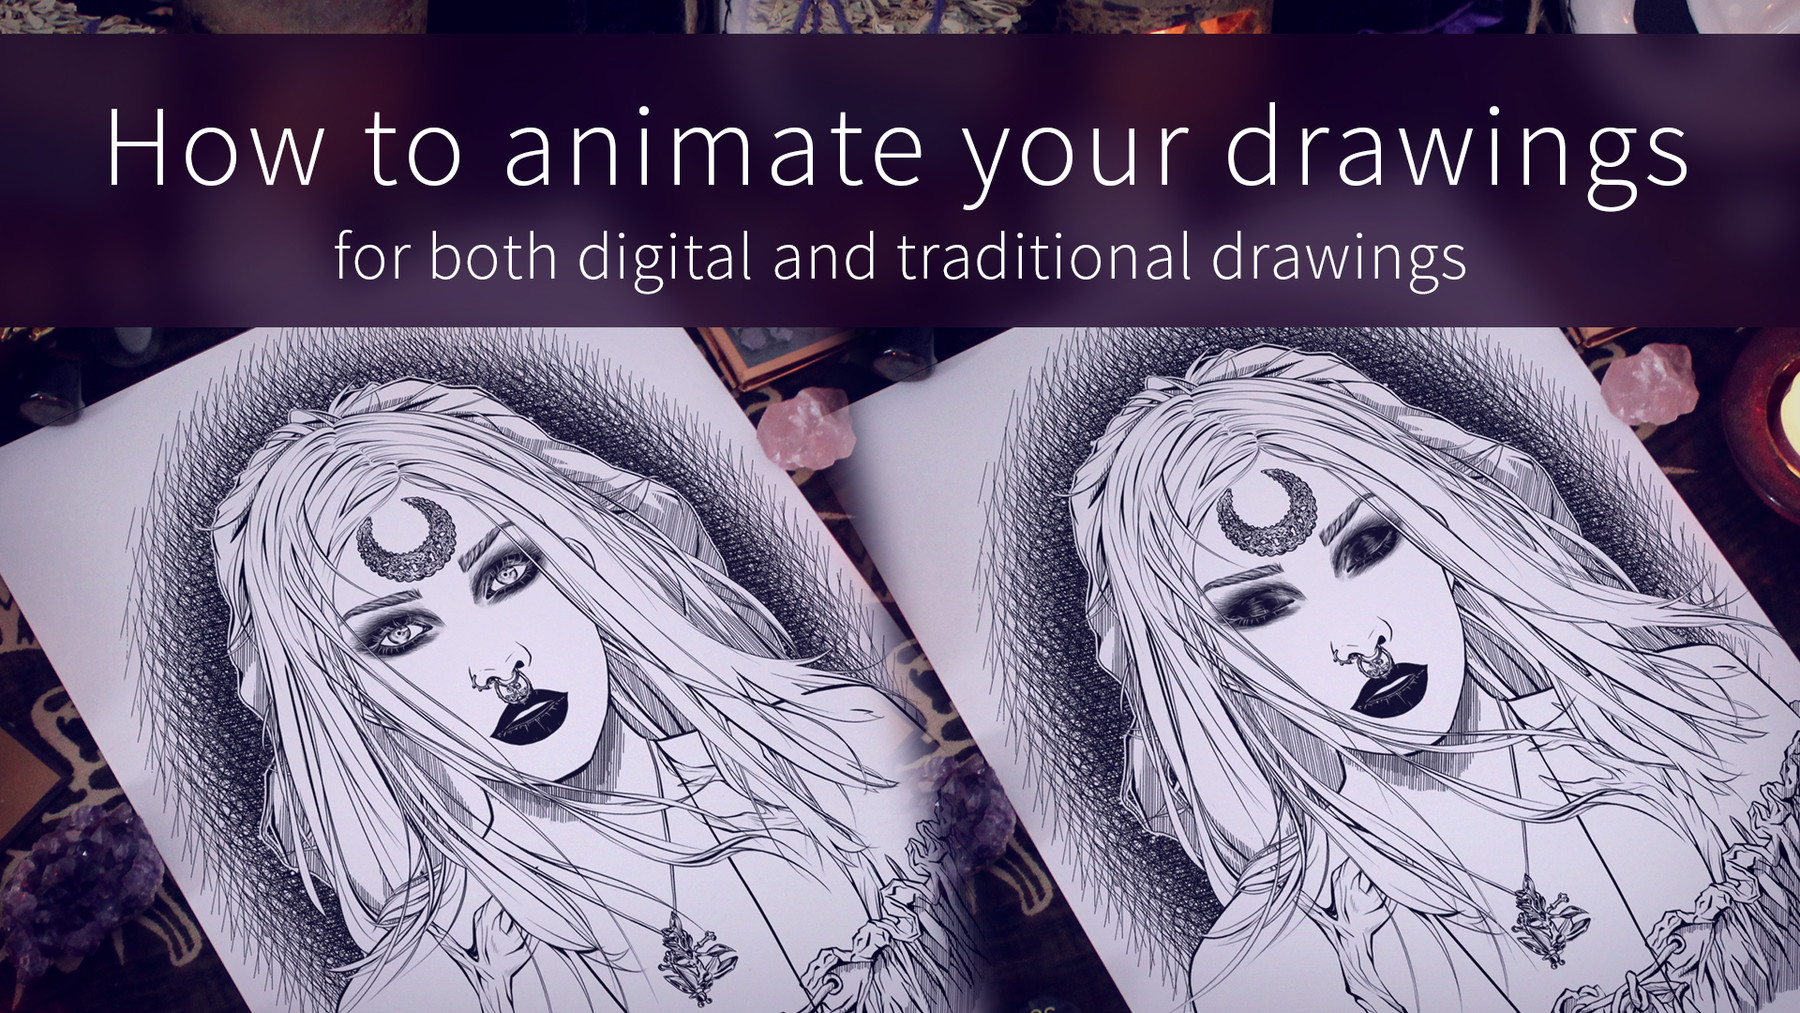 ArtStation How to animate your drawings by Helena Cnockaert